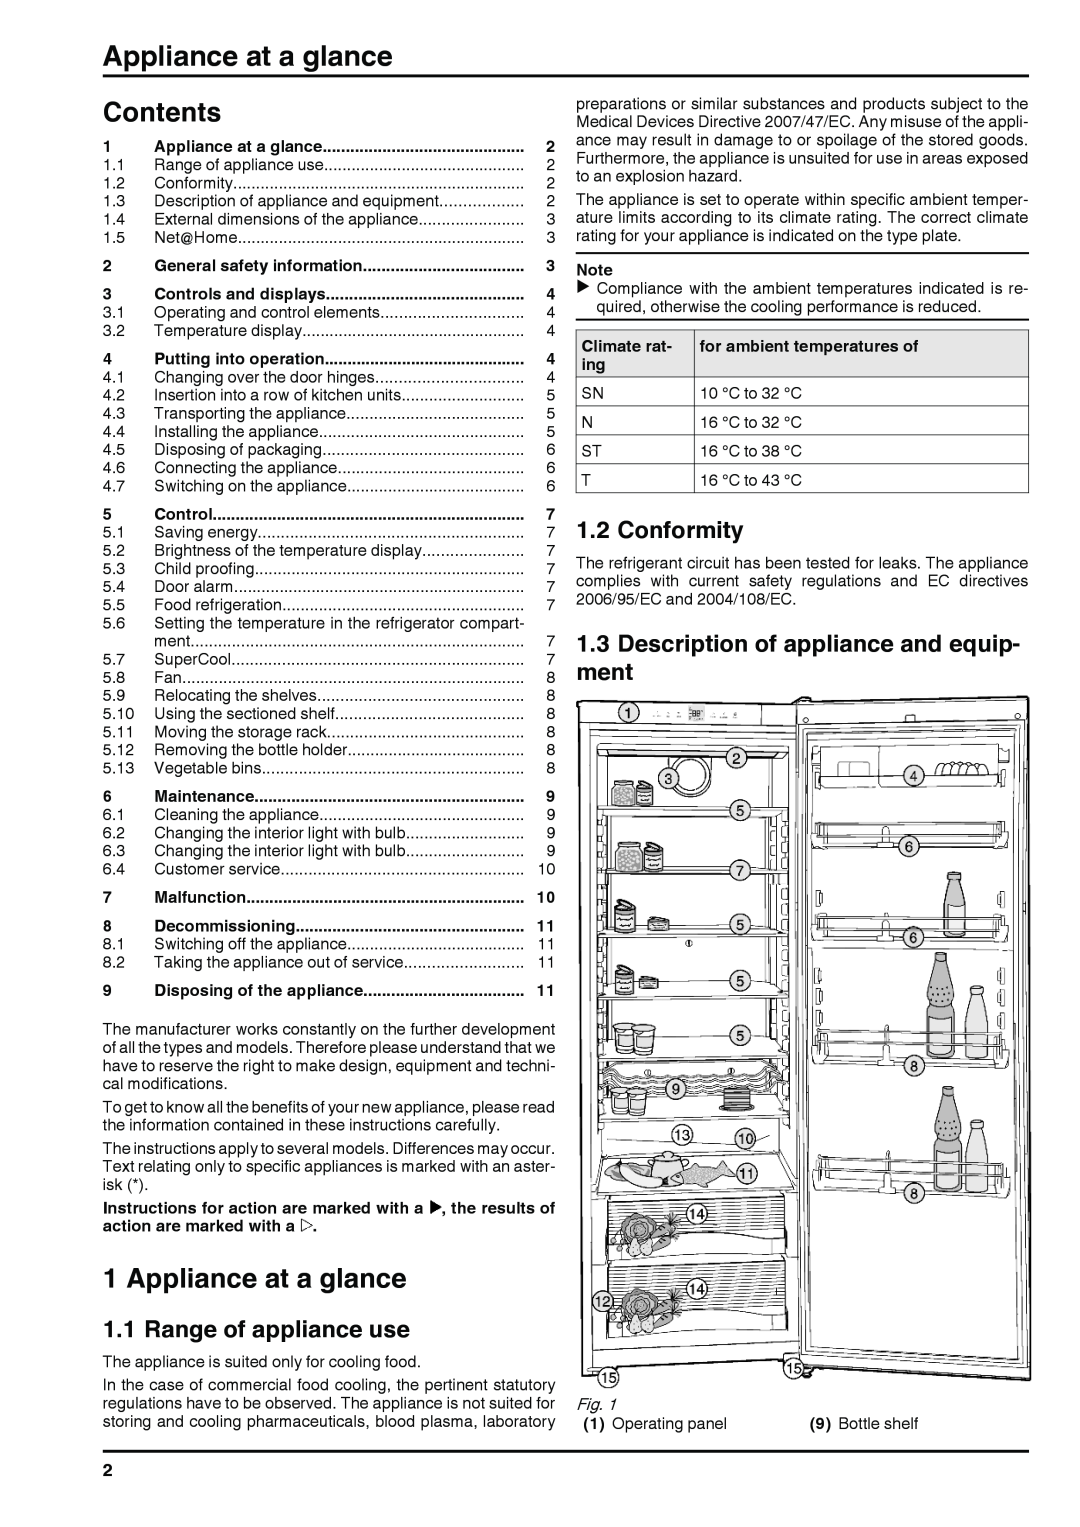 Liebherr 120309 7084442 - 00 Appliance at a glance, Contents, Conformity, Description of appliance and equip, ment 